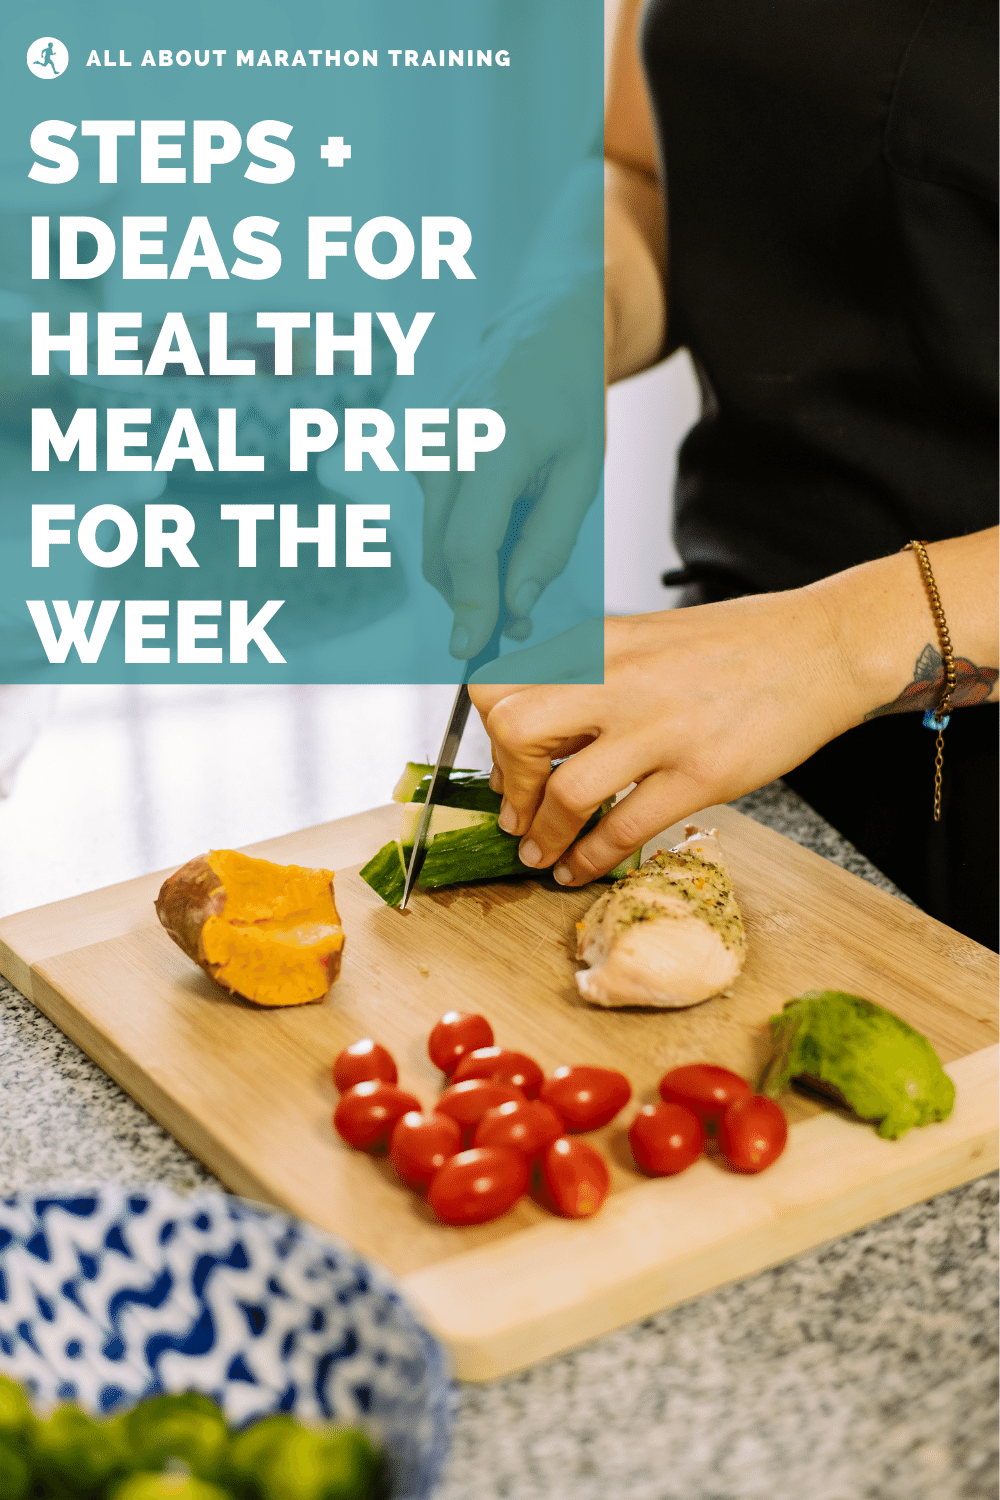 An Easy Meal Prep Routine for Runners